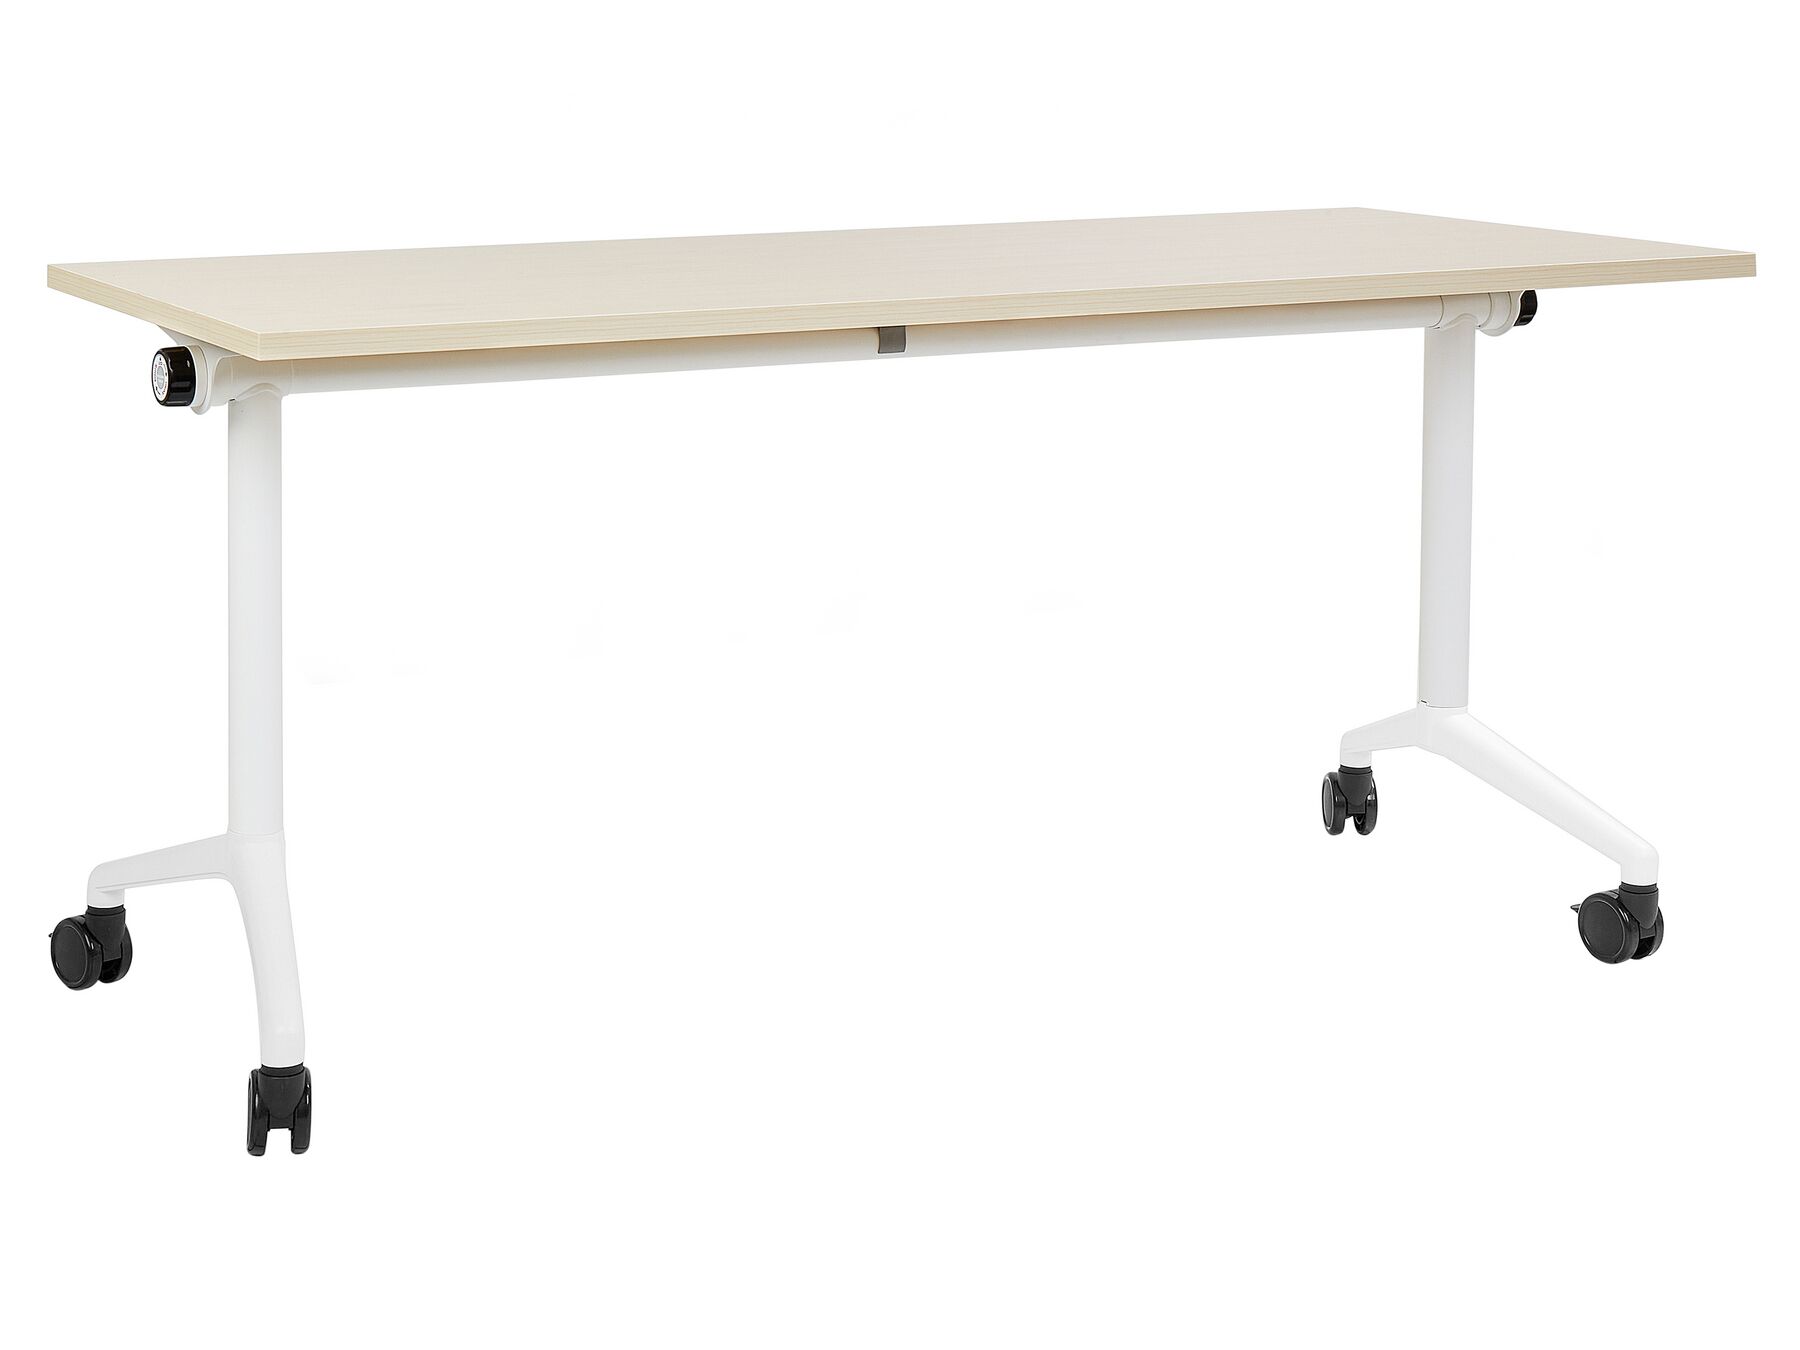 Folding Office Desk with Casters 160 x 60 cm Light Wood and White CAVI_922280